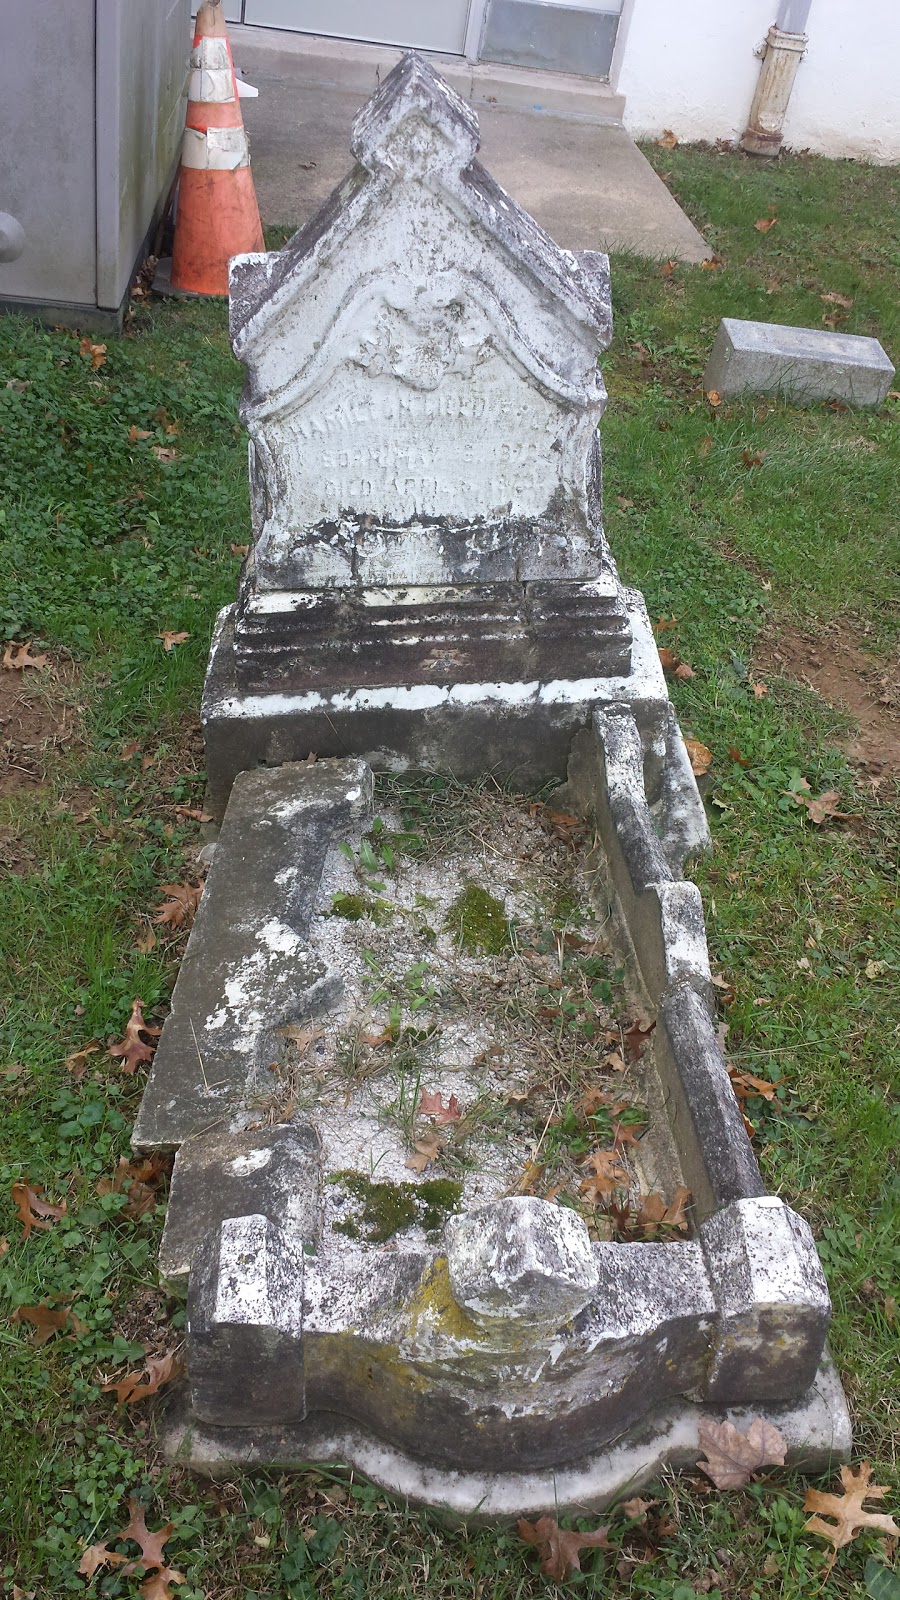 Mount Hope Cemetery in Aston PA | 4010 Concord Rd, Aston, PA 19014 | Phone: (610) 459-5619